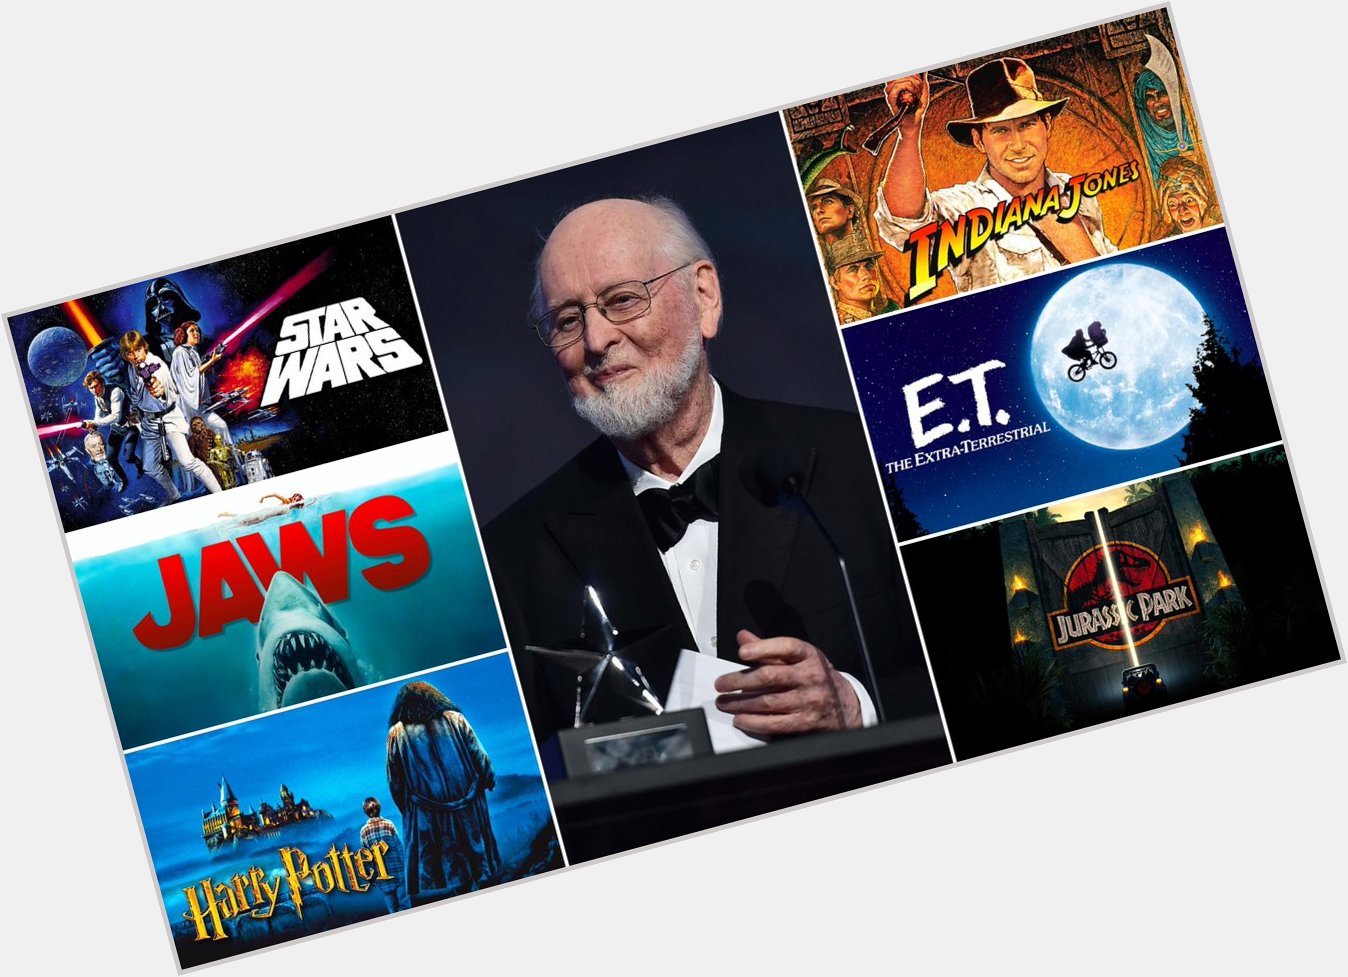 Happy birthday to the greatest film composer of all-time, John Williams. 